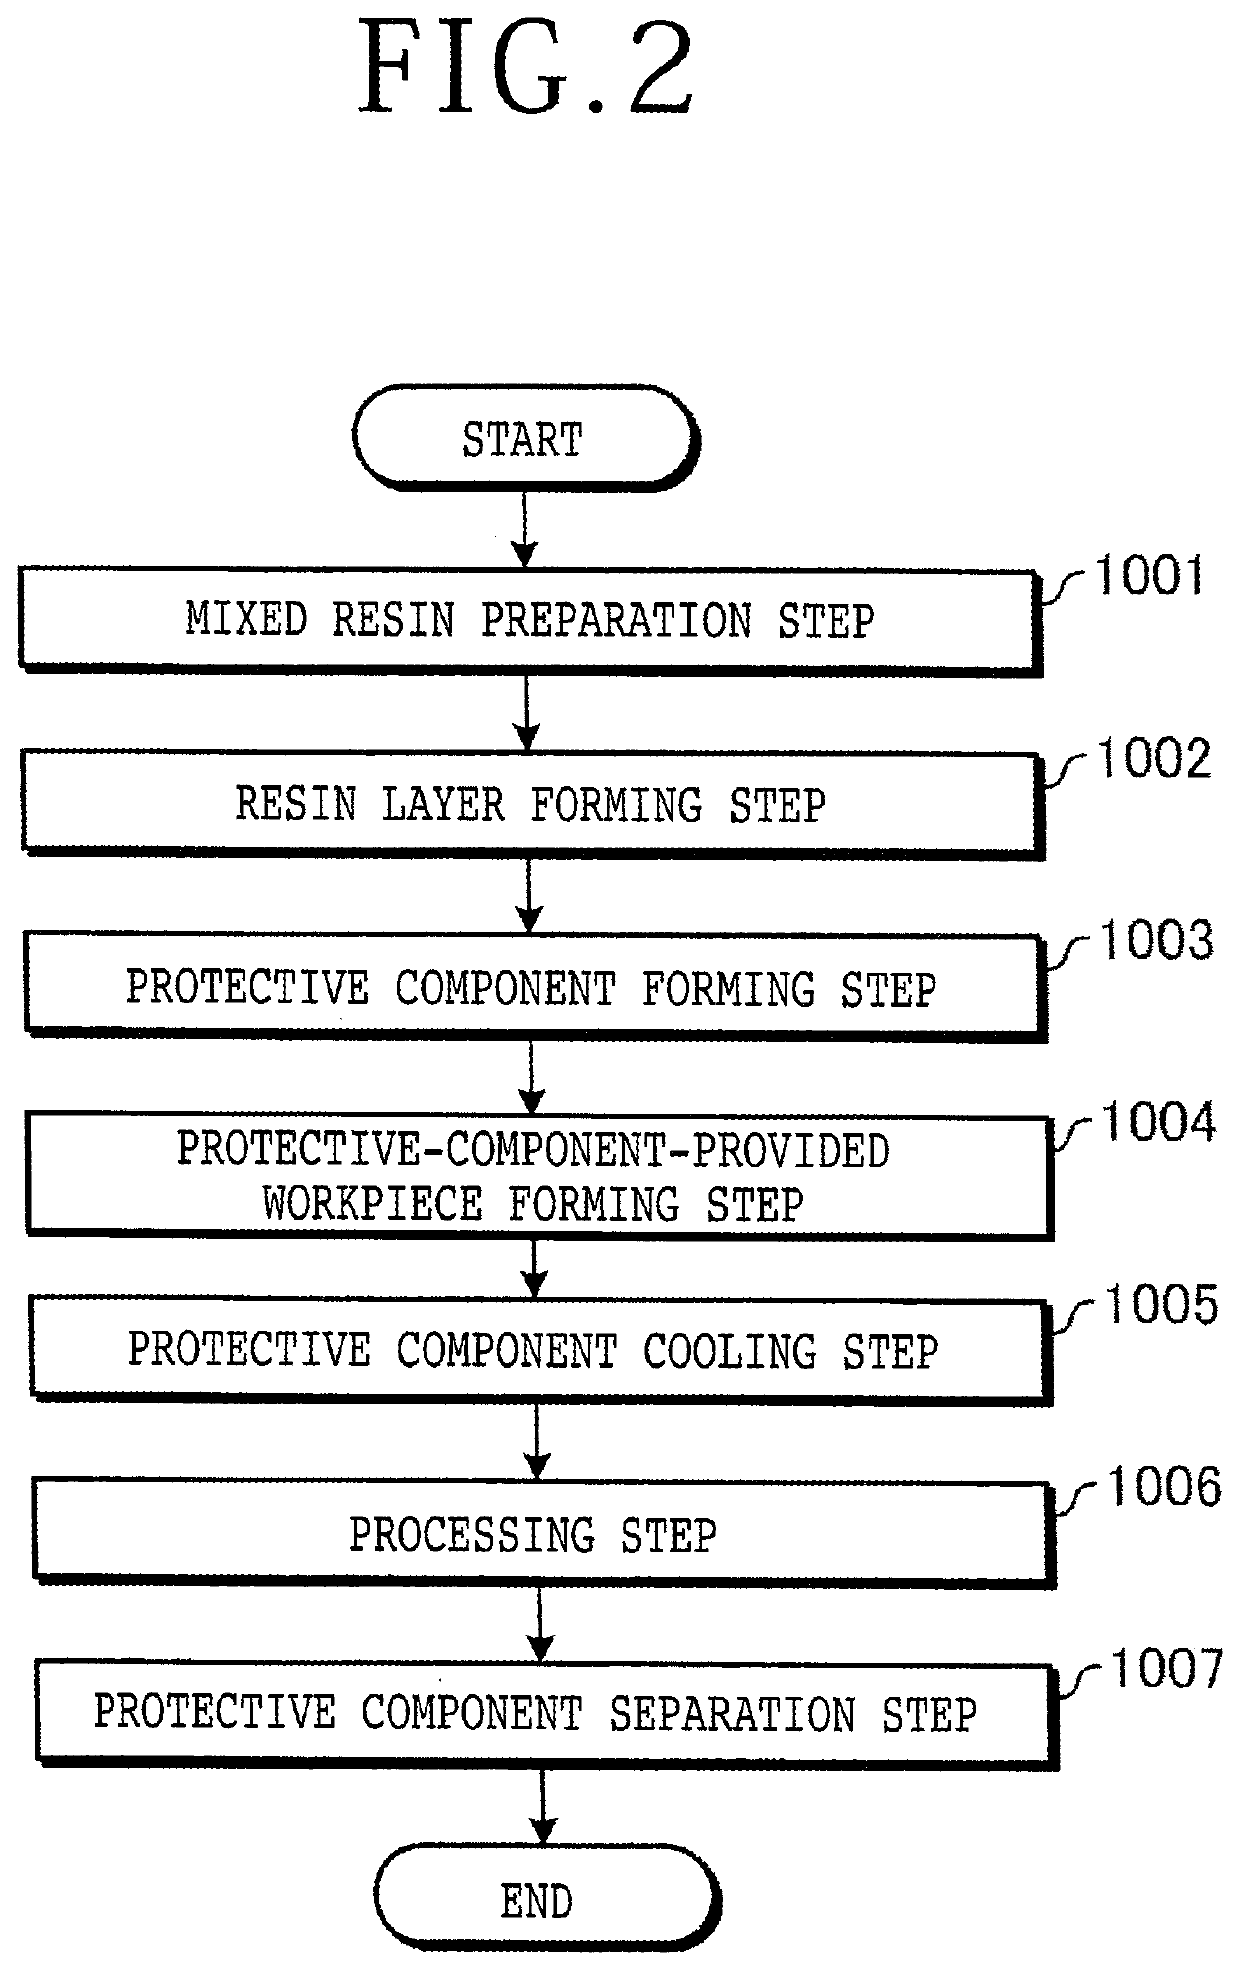 Manufacturing method of protective-component-provided workpiece